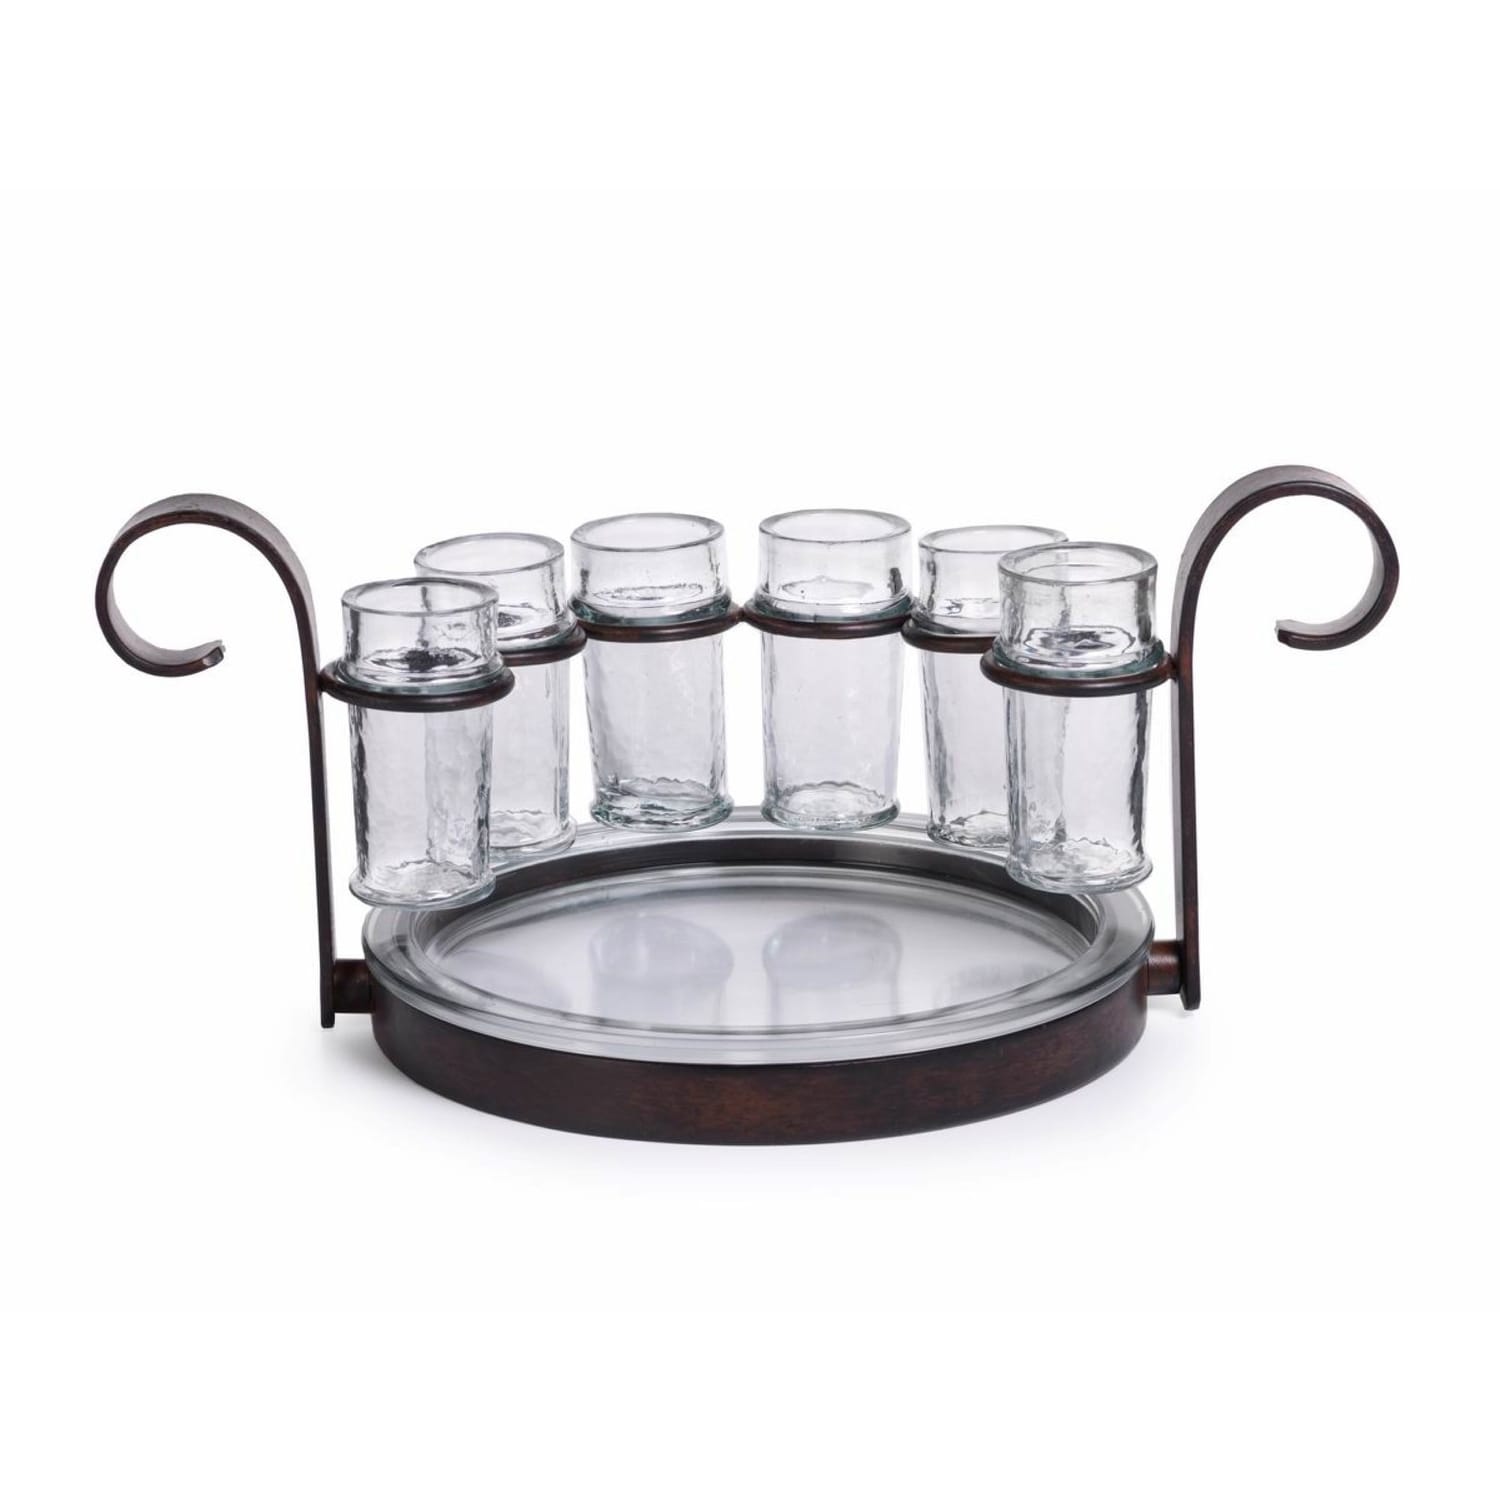 Details about   Soapstone Tequila Shooter Set Save 80% 